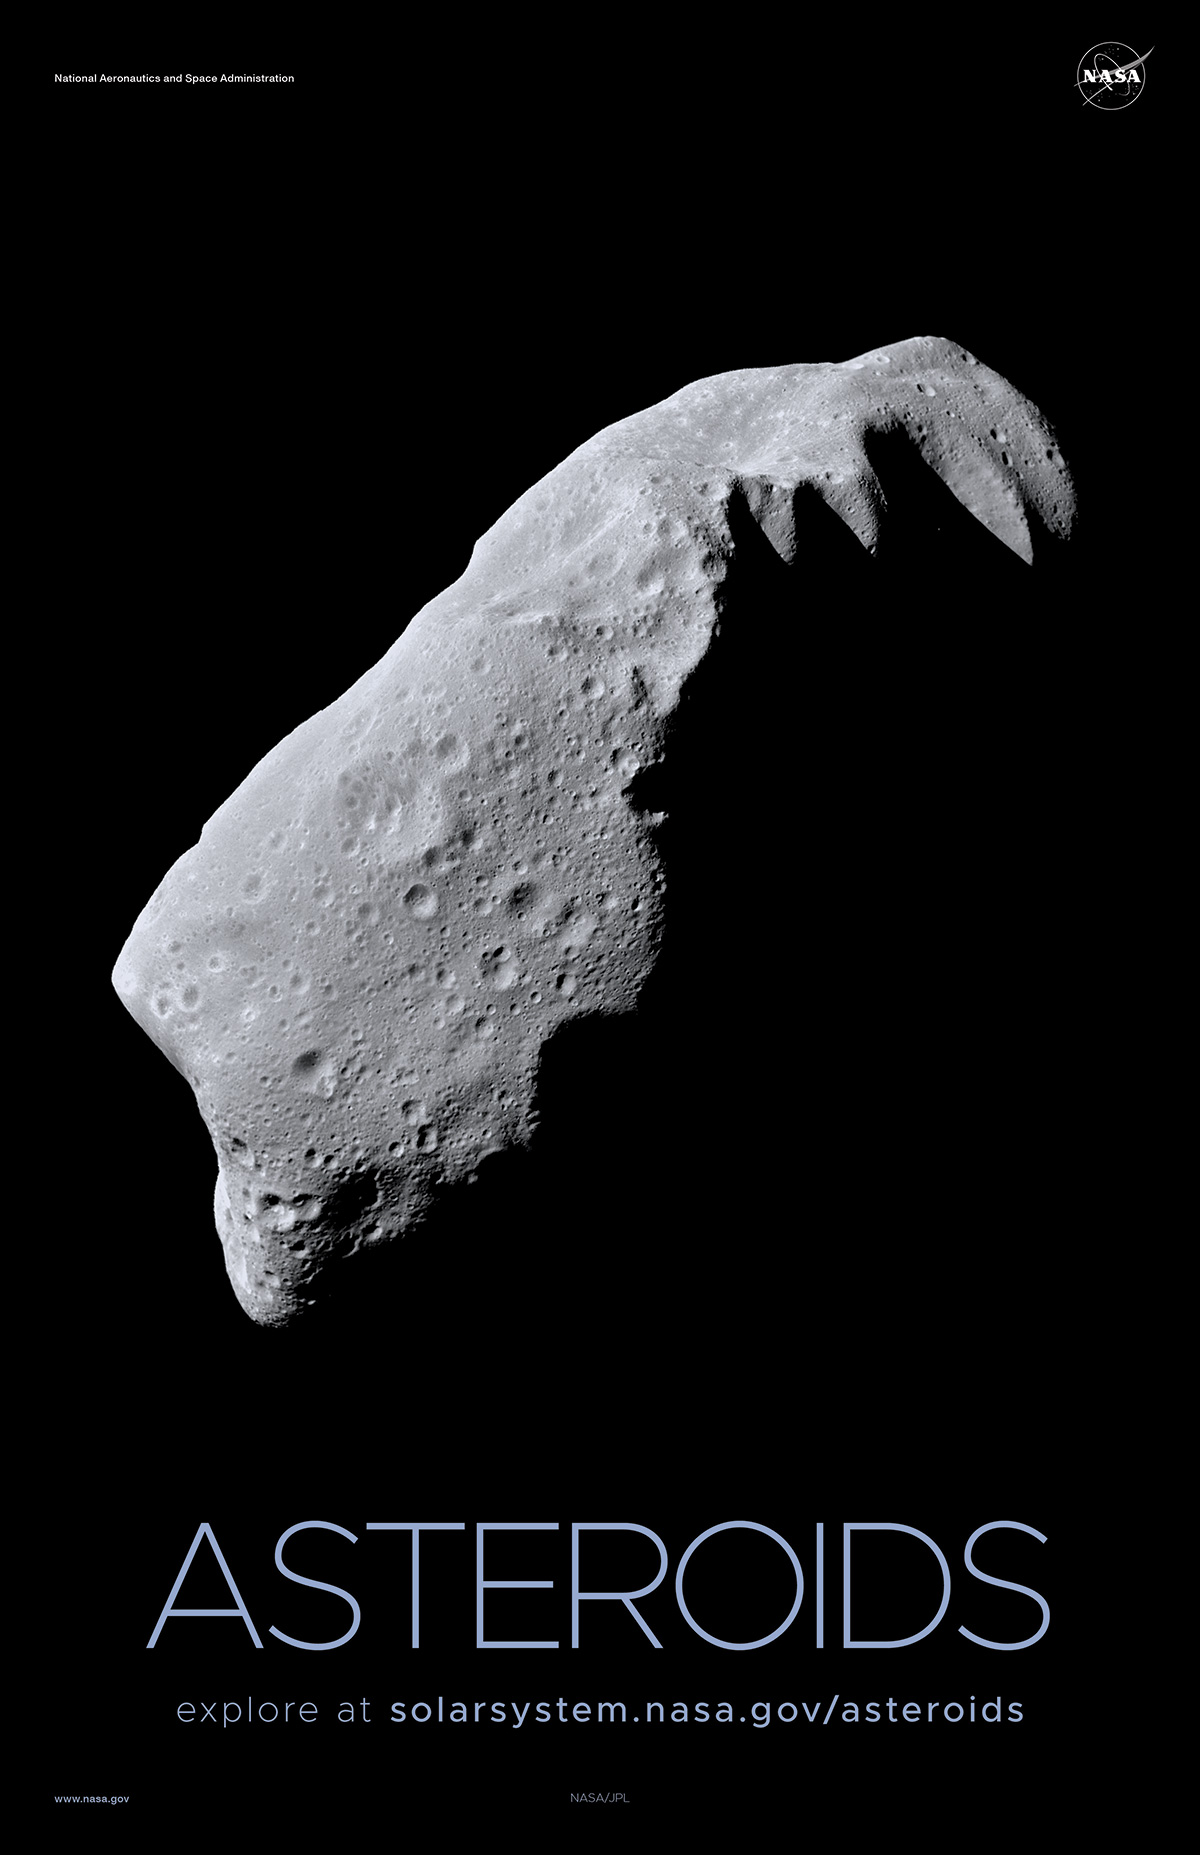 A movie-style asteroid poster.